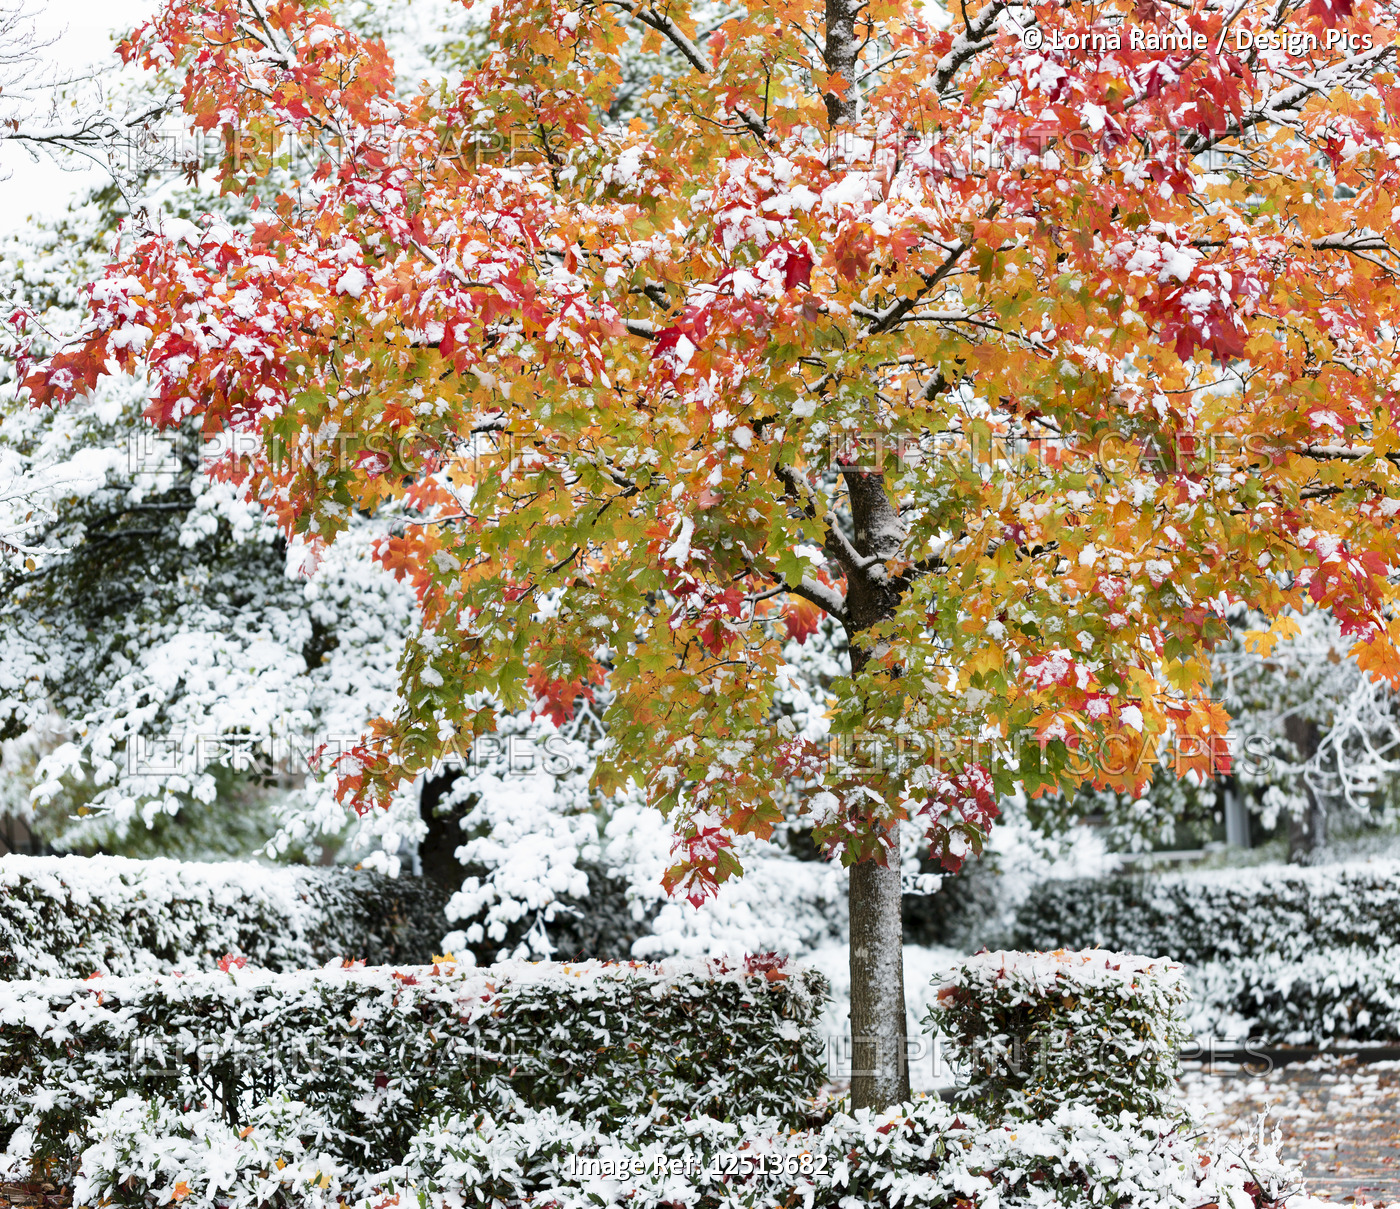 A dusting of snow over hedges and shrubs, and covering a maple tree in autumn ...